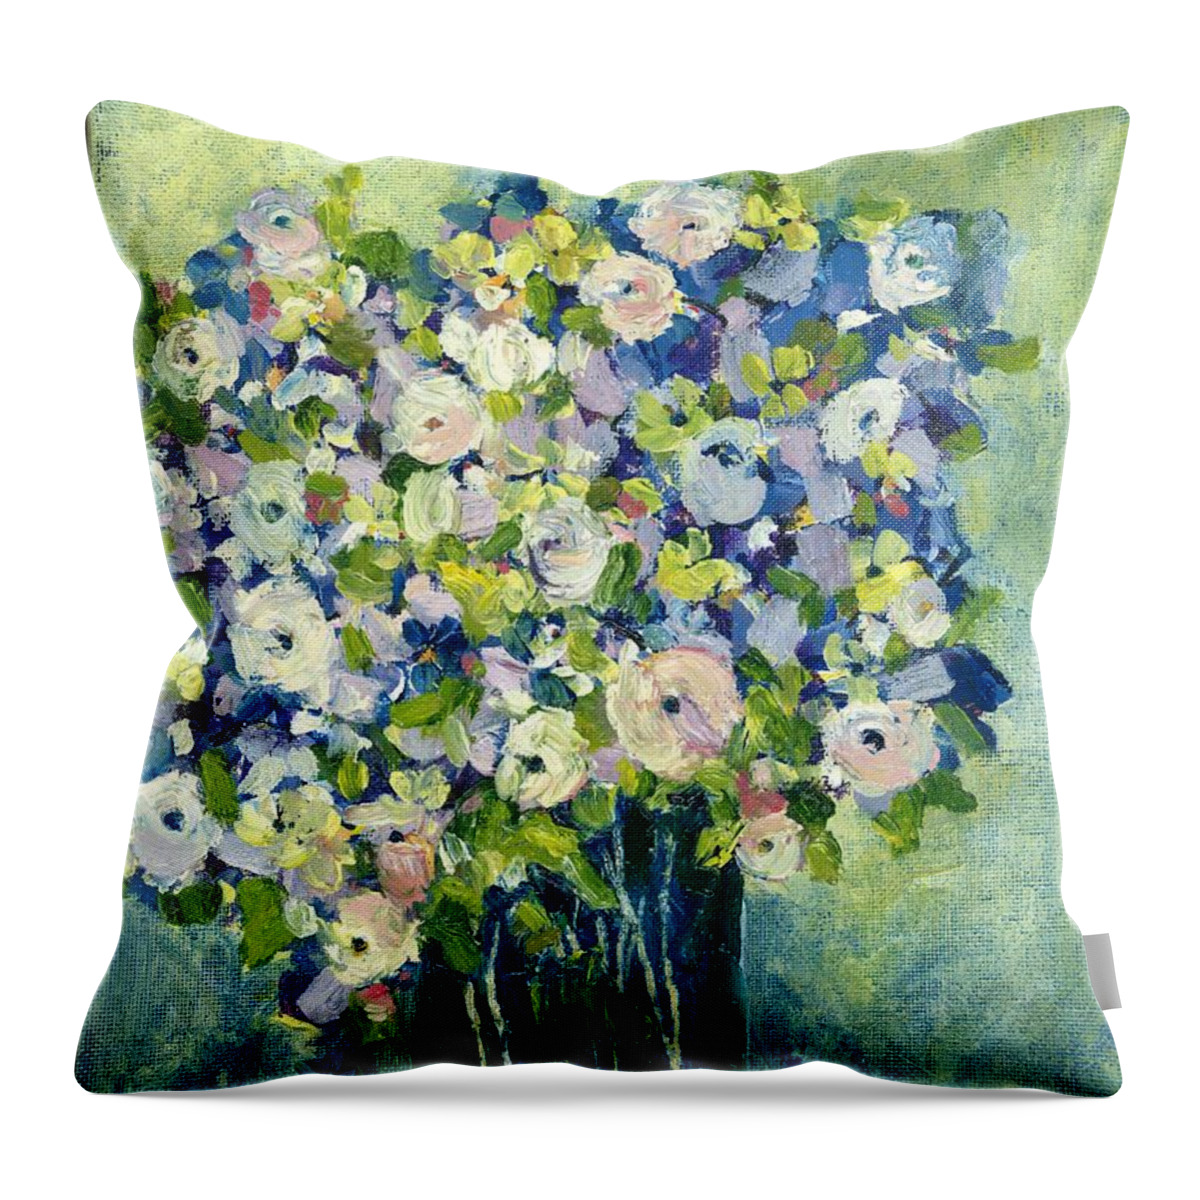 Orchards Throw Pillow featuring the painting Grandma's Flowers by Sherry Harradence